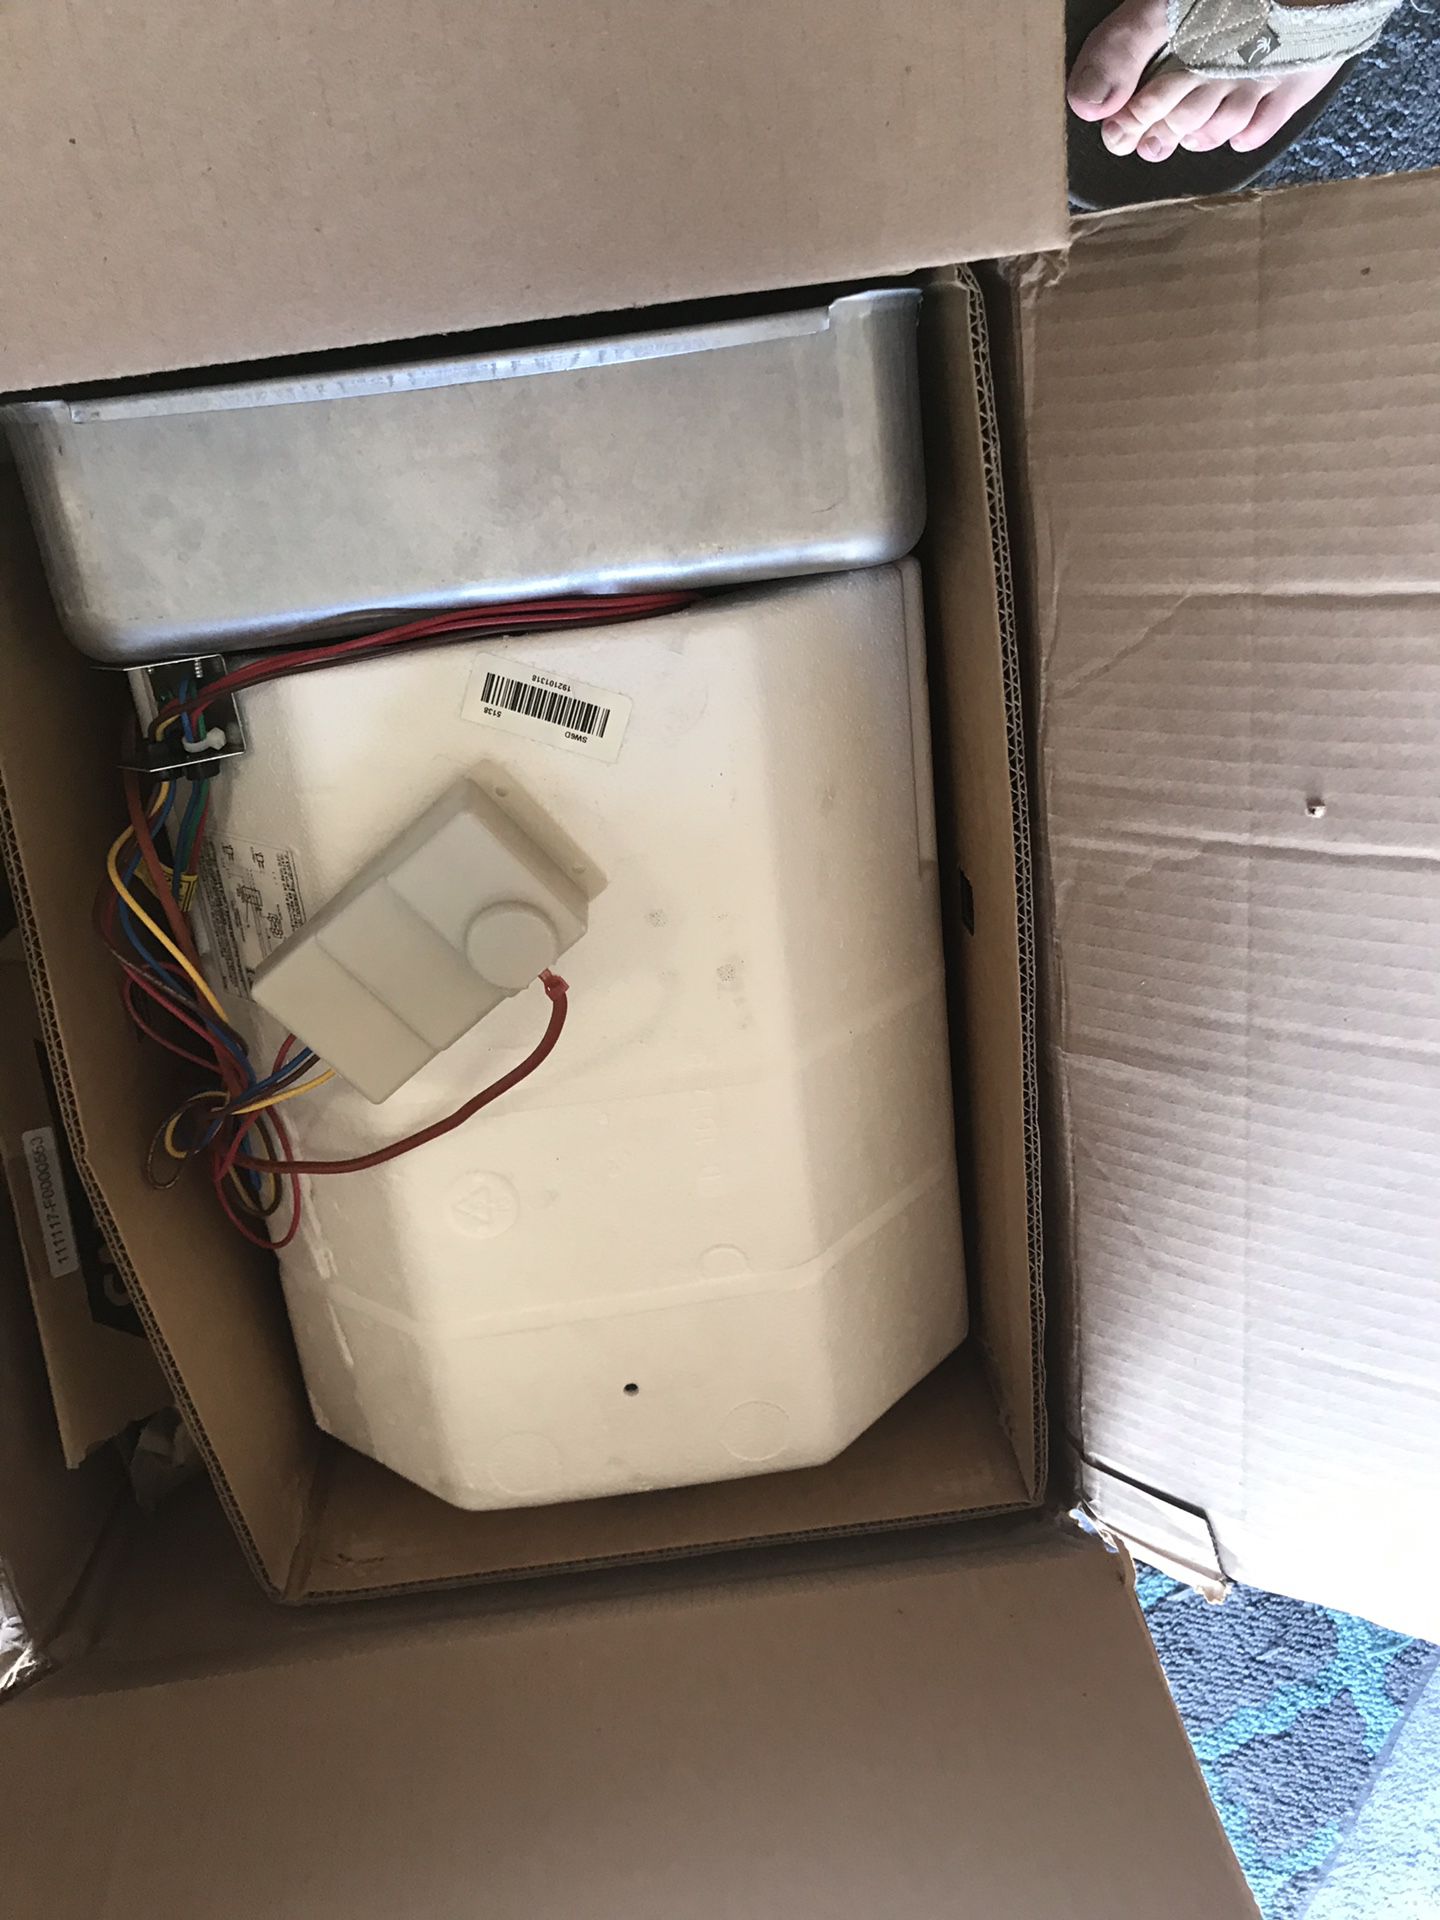 6 gallon water heater for RV/Camper. I bought the wrong one. Just getting around to fix it. Now I have the wrong one. It’s propane only. New in box!